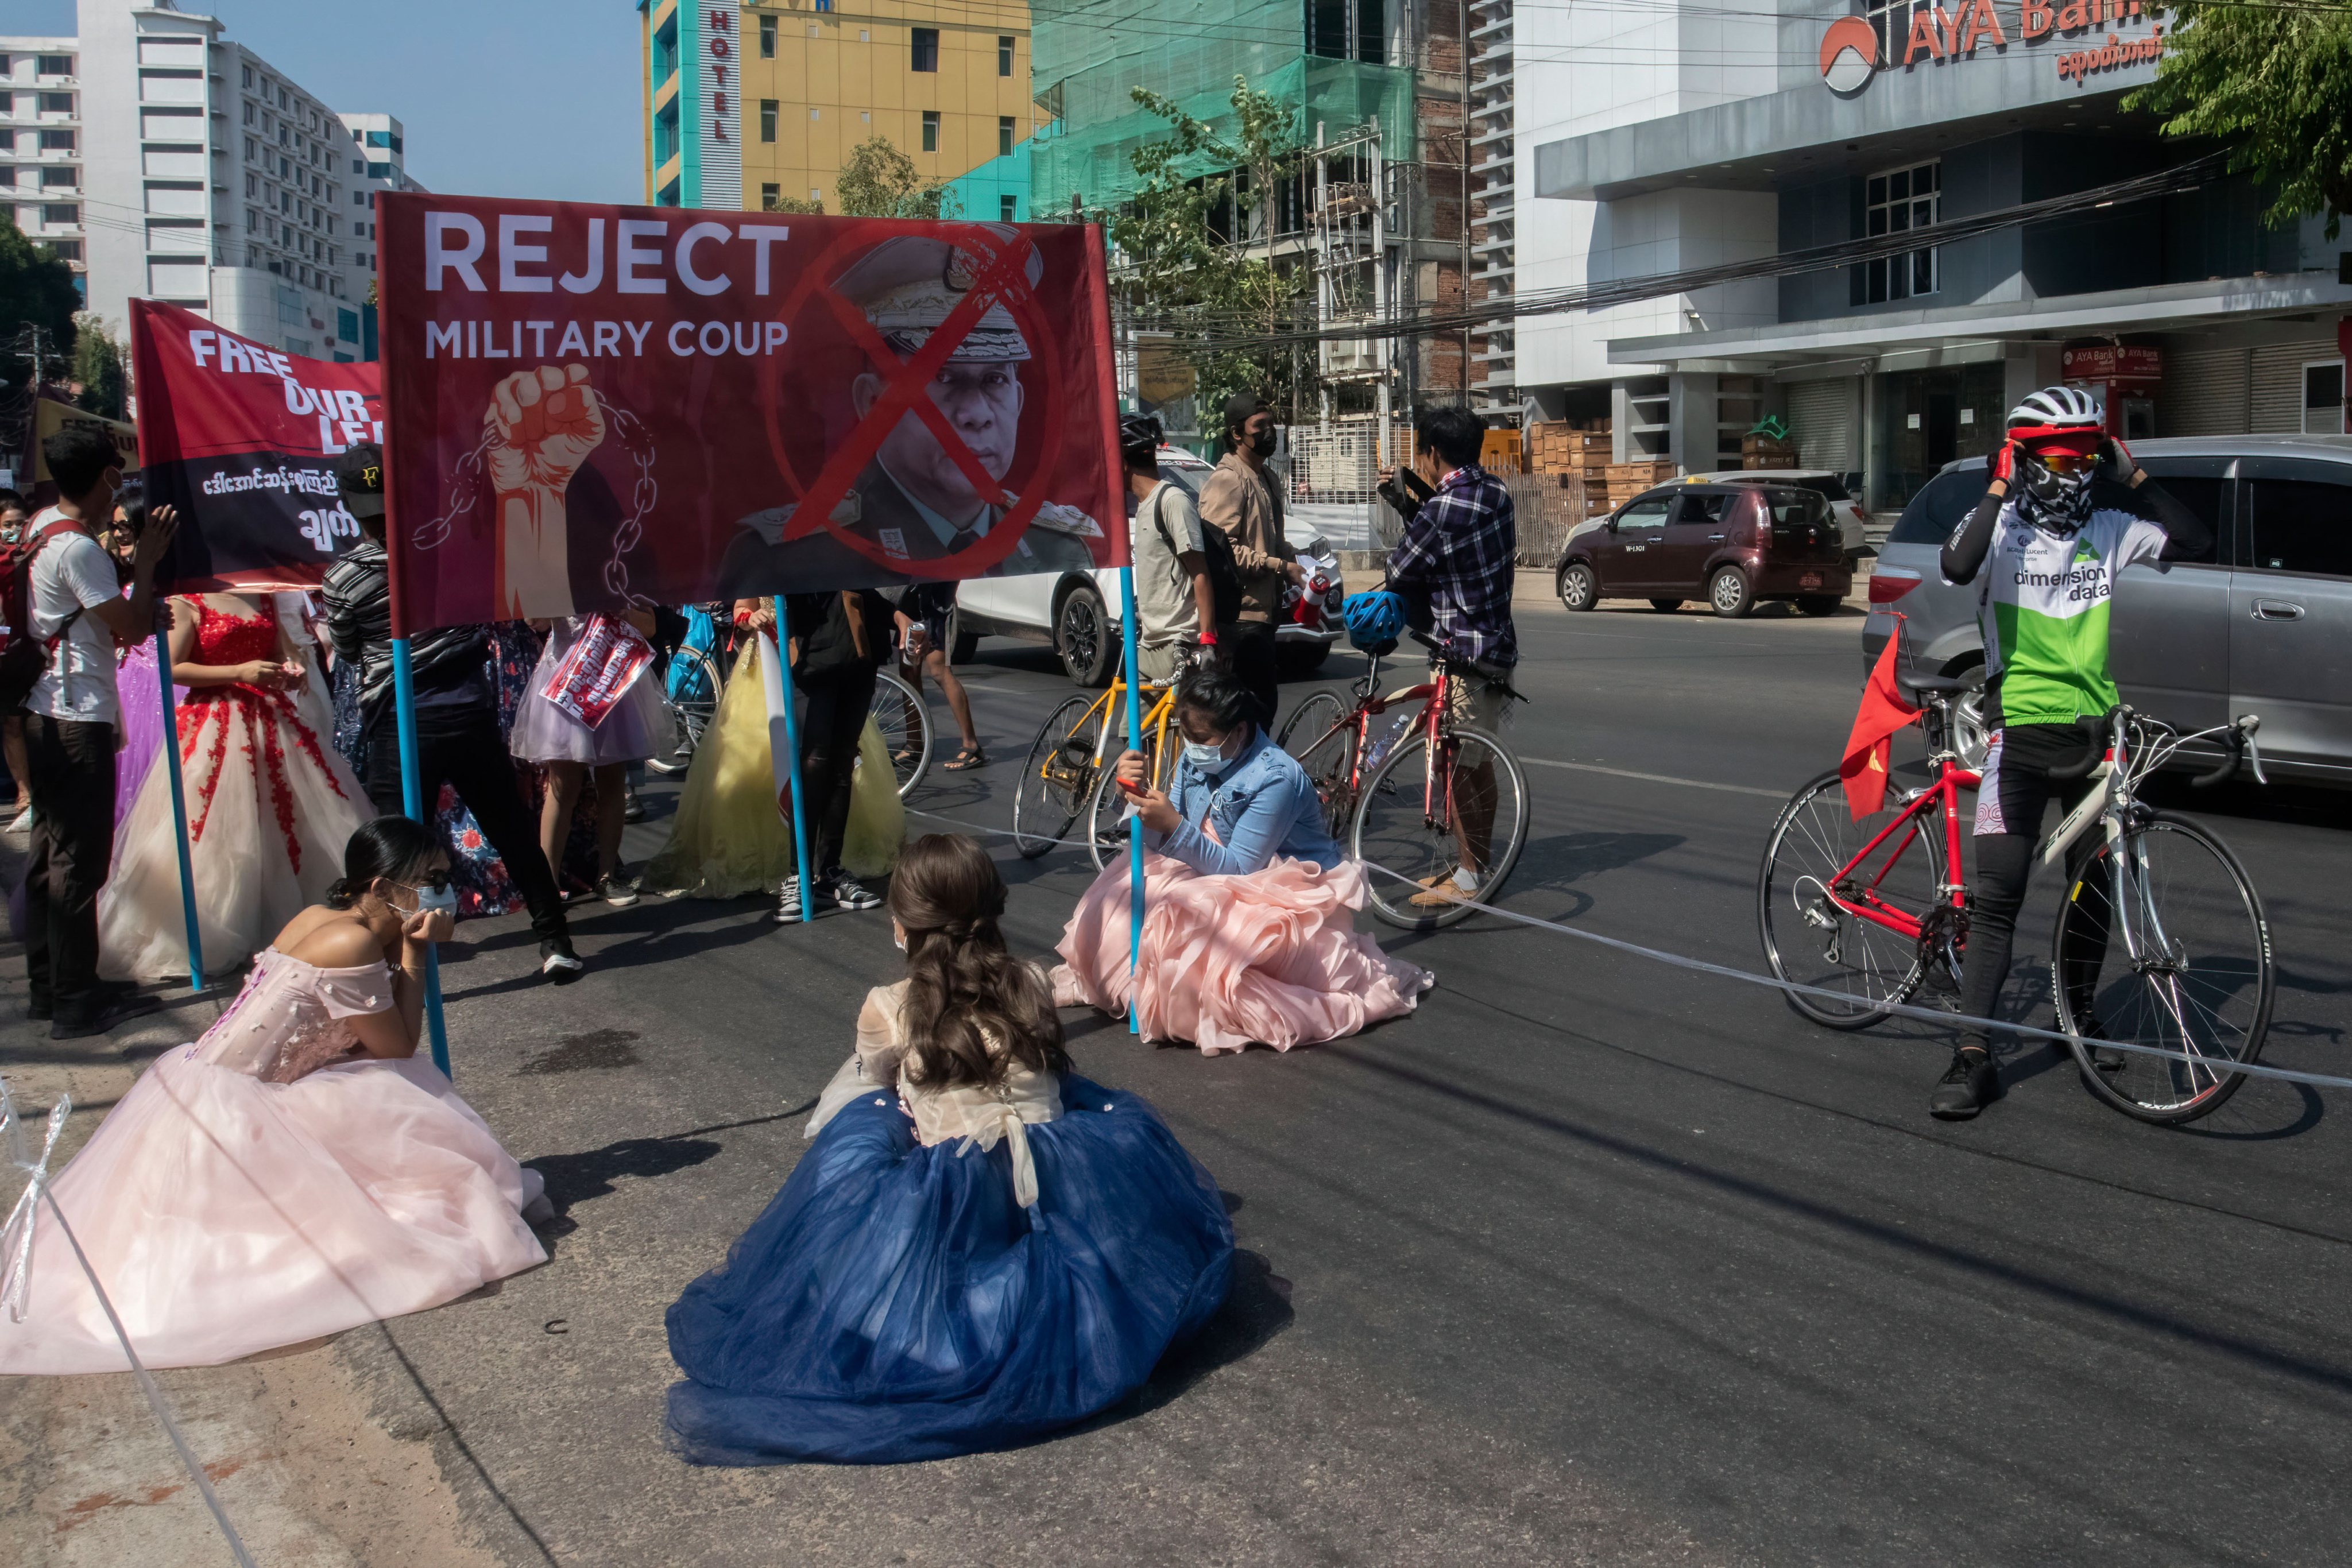 Protesters wearing wedding dresses march on the street